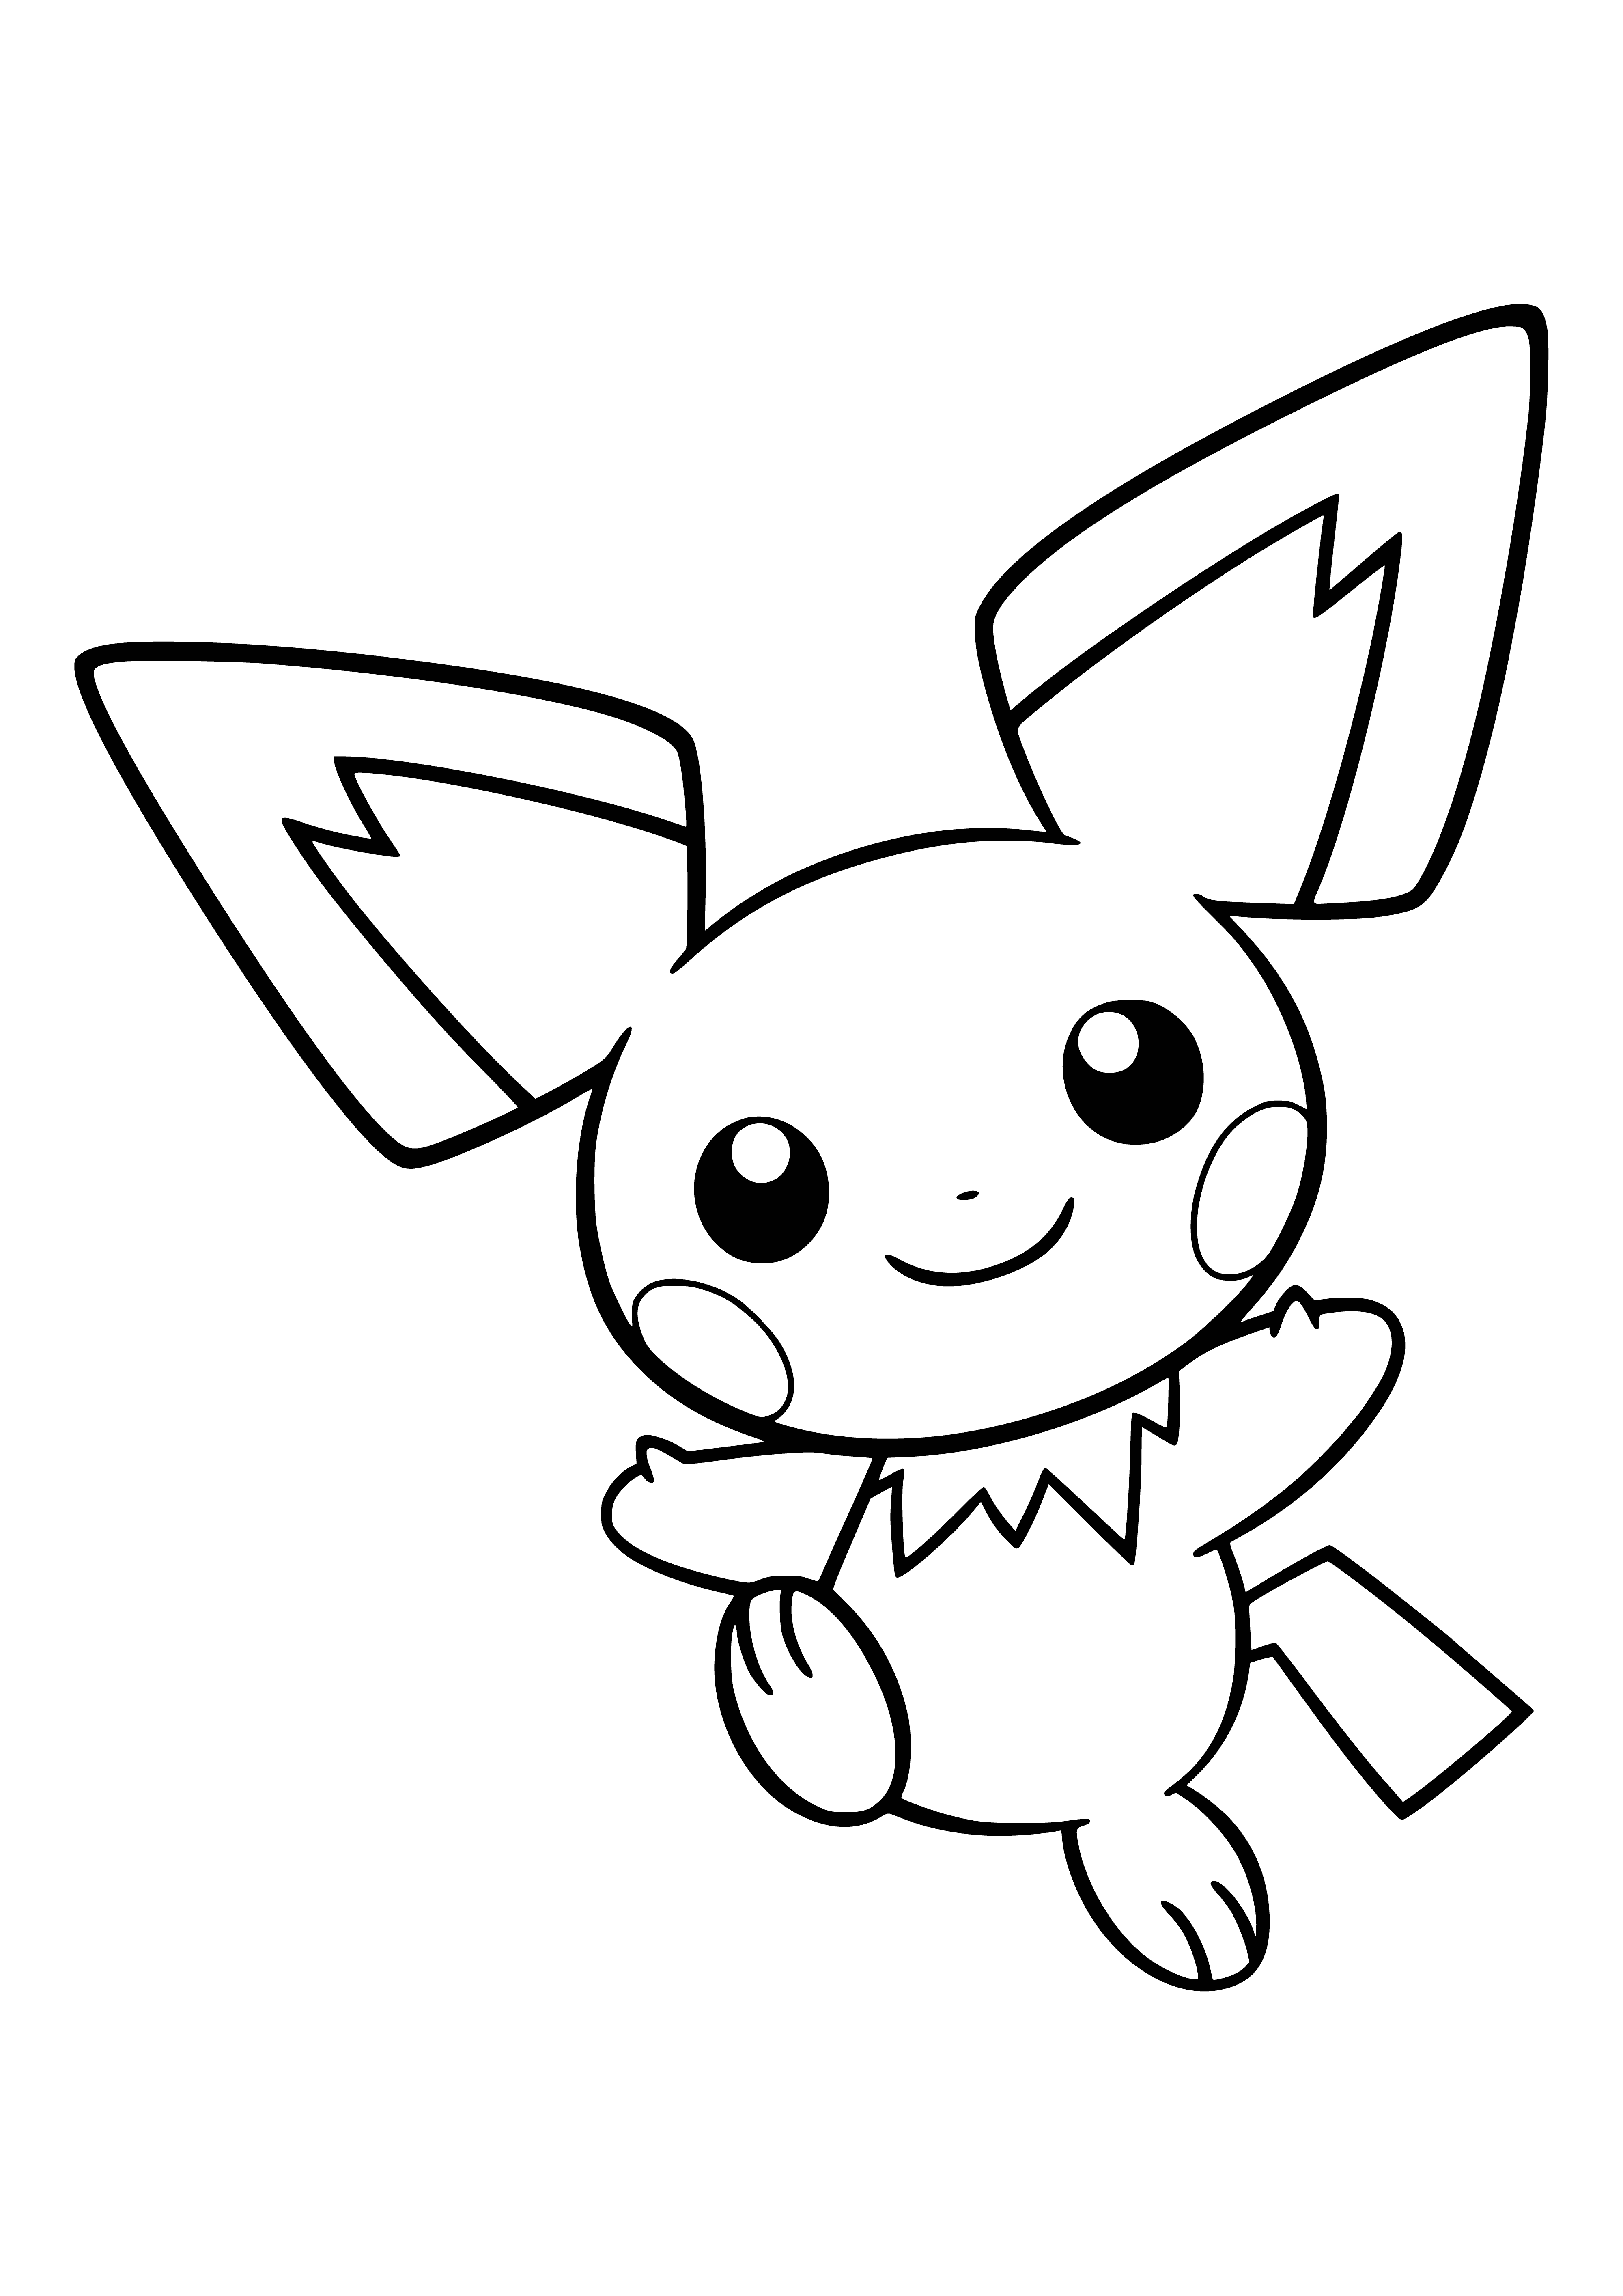 coloring page: A small, friendly rodent Pokemon that is clumsy and shocks its surroundings but evolves into a Pikachu when exposed to a Thunder Stone.